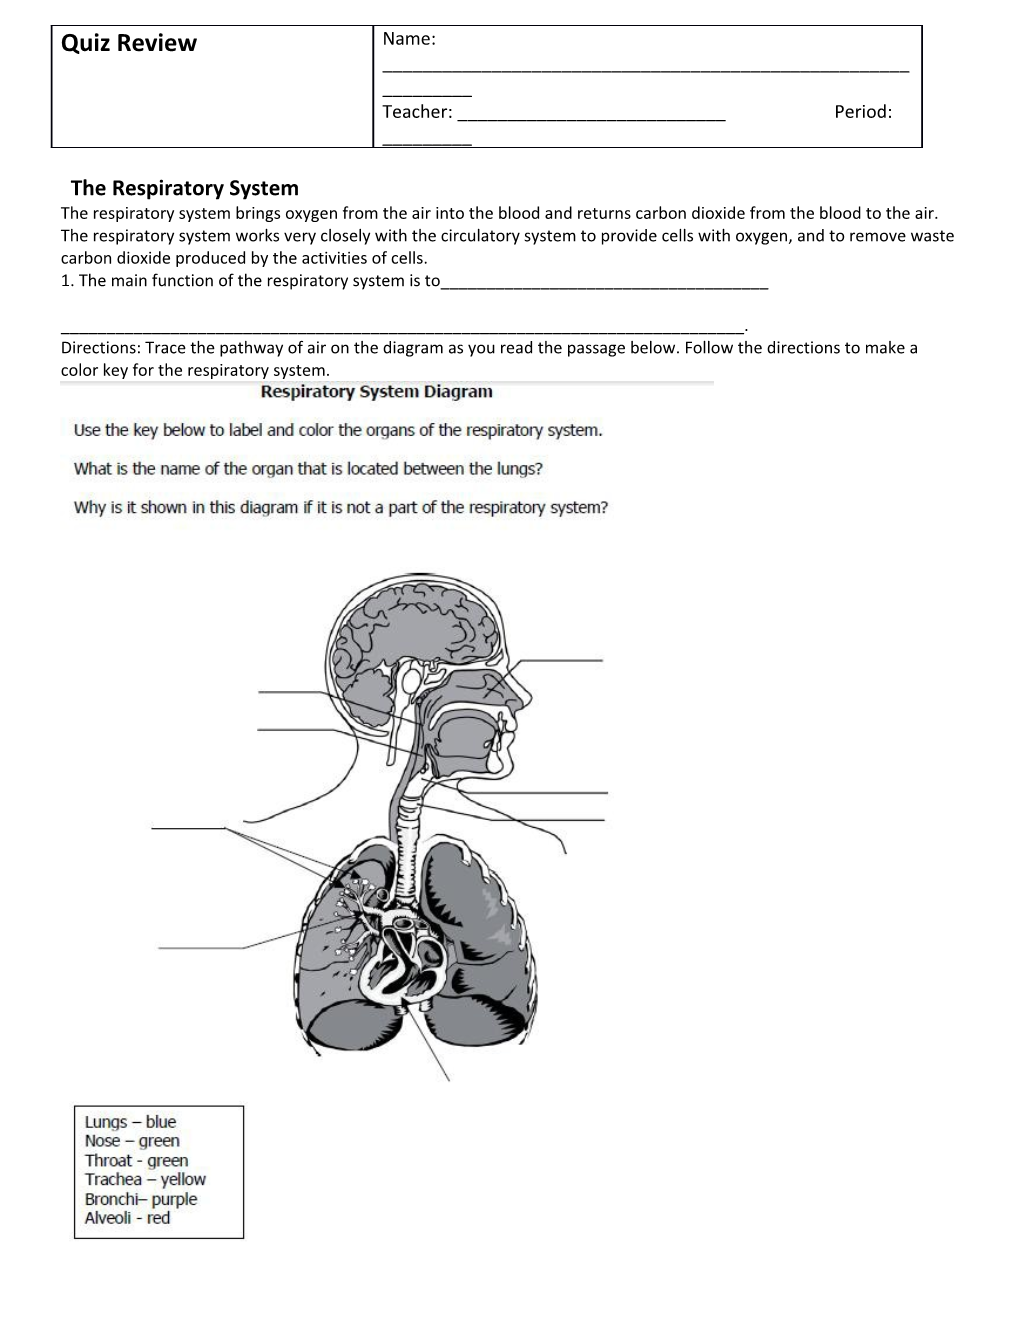 1. the Main Function of the Respiratory System Is To______